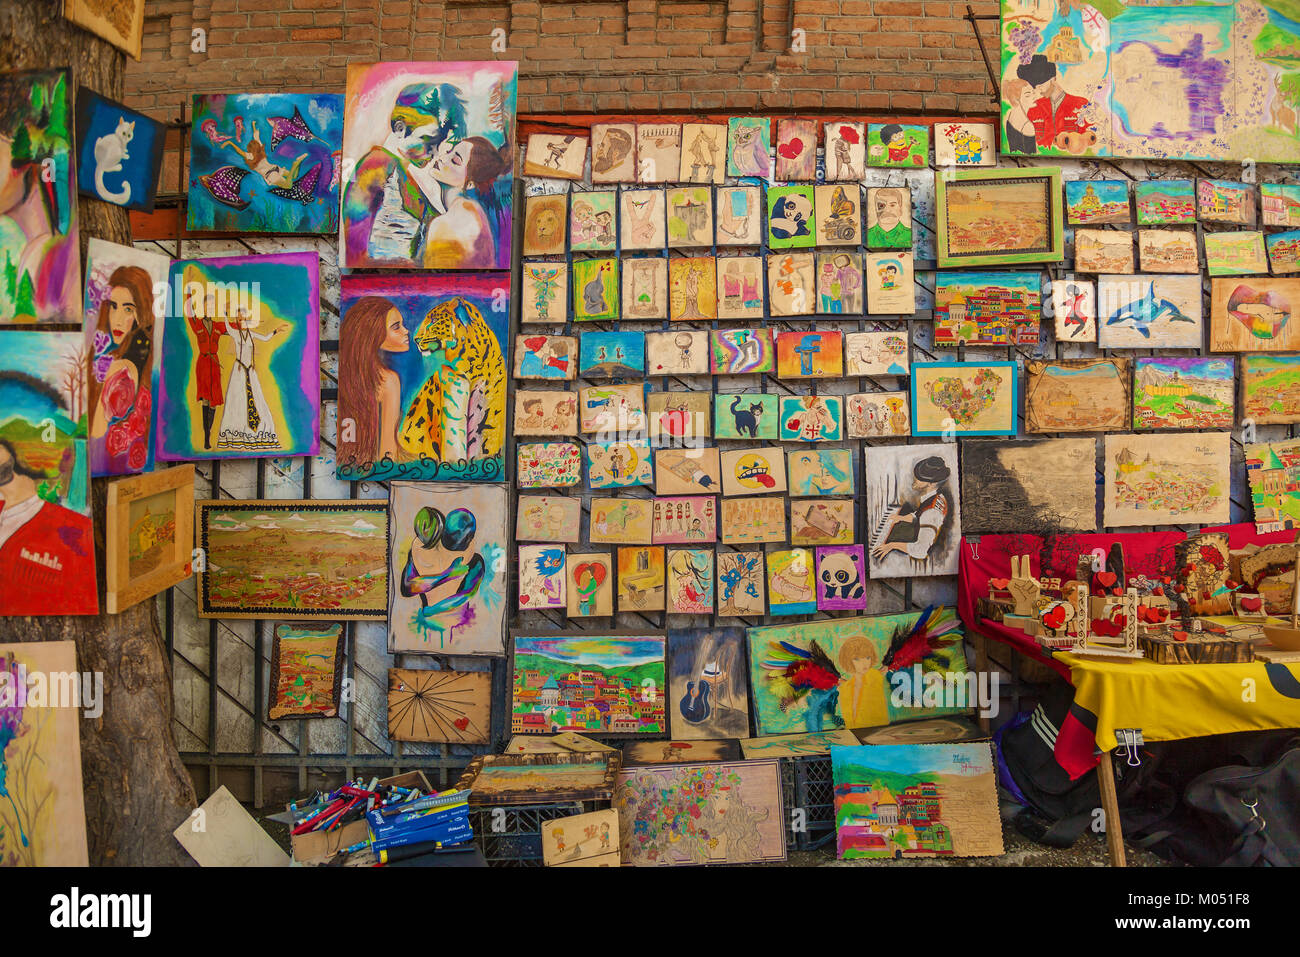 Market of paintings in Tbilisi, Georgia Stock Photo